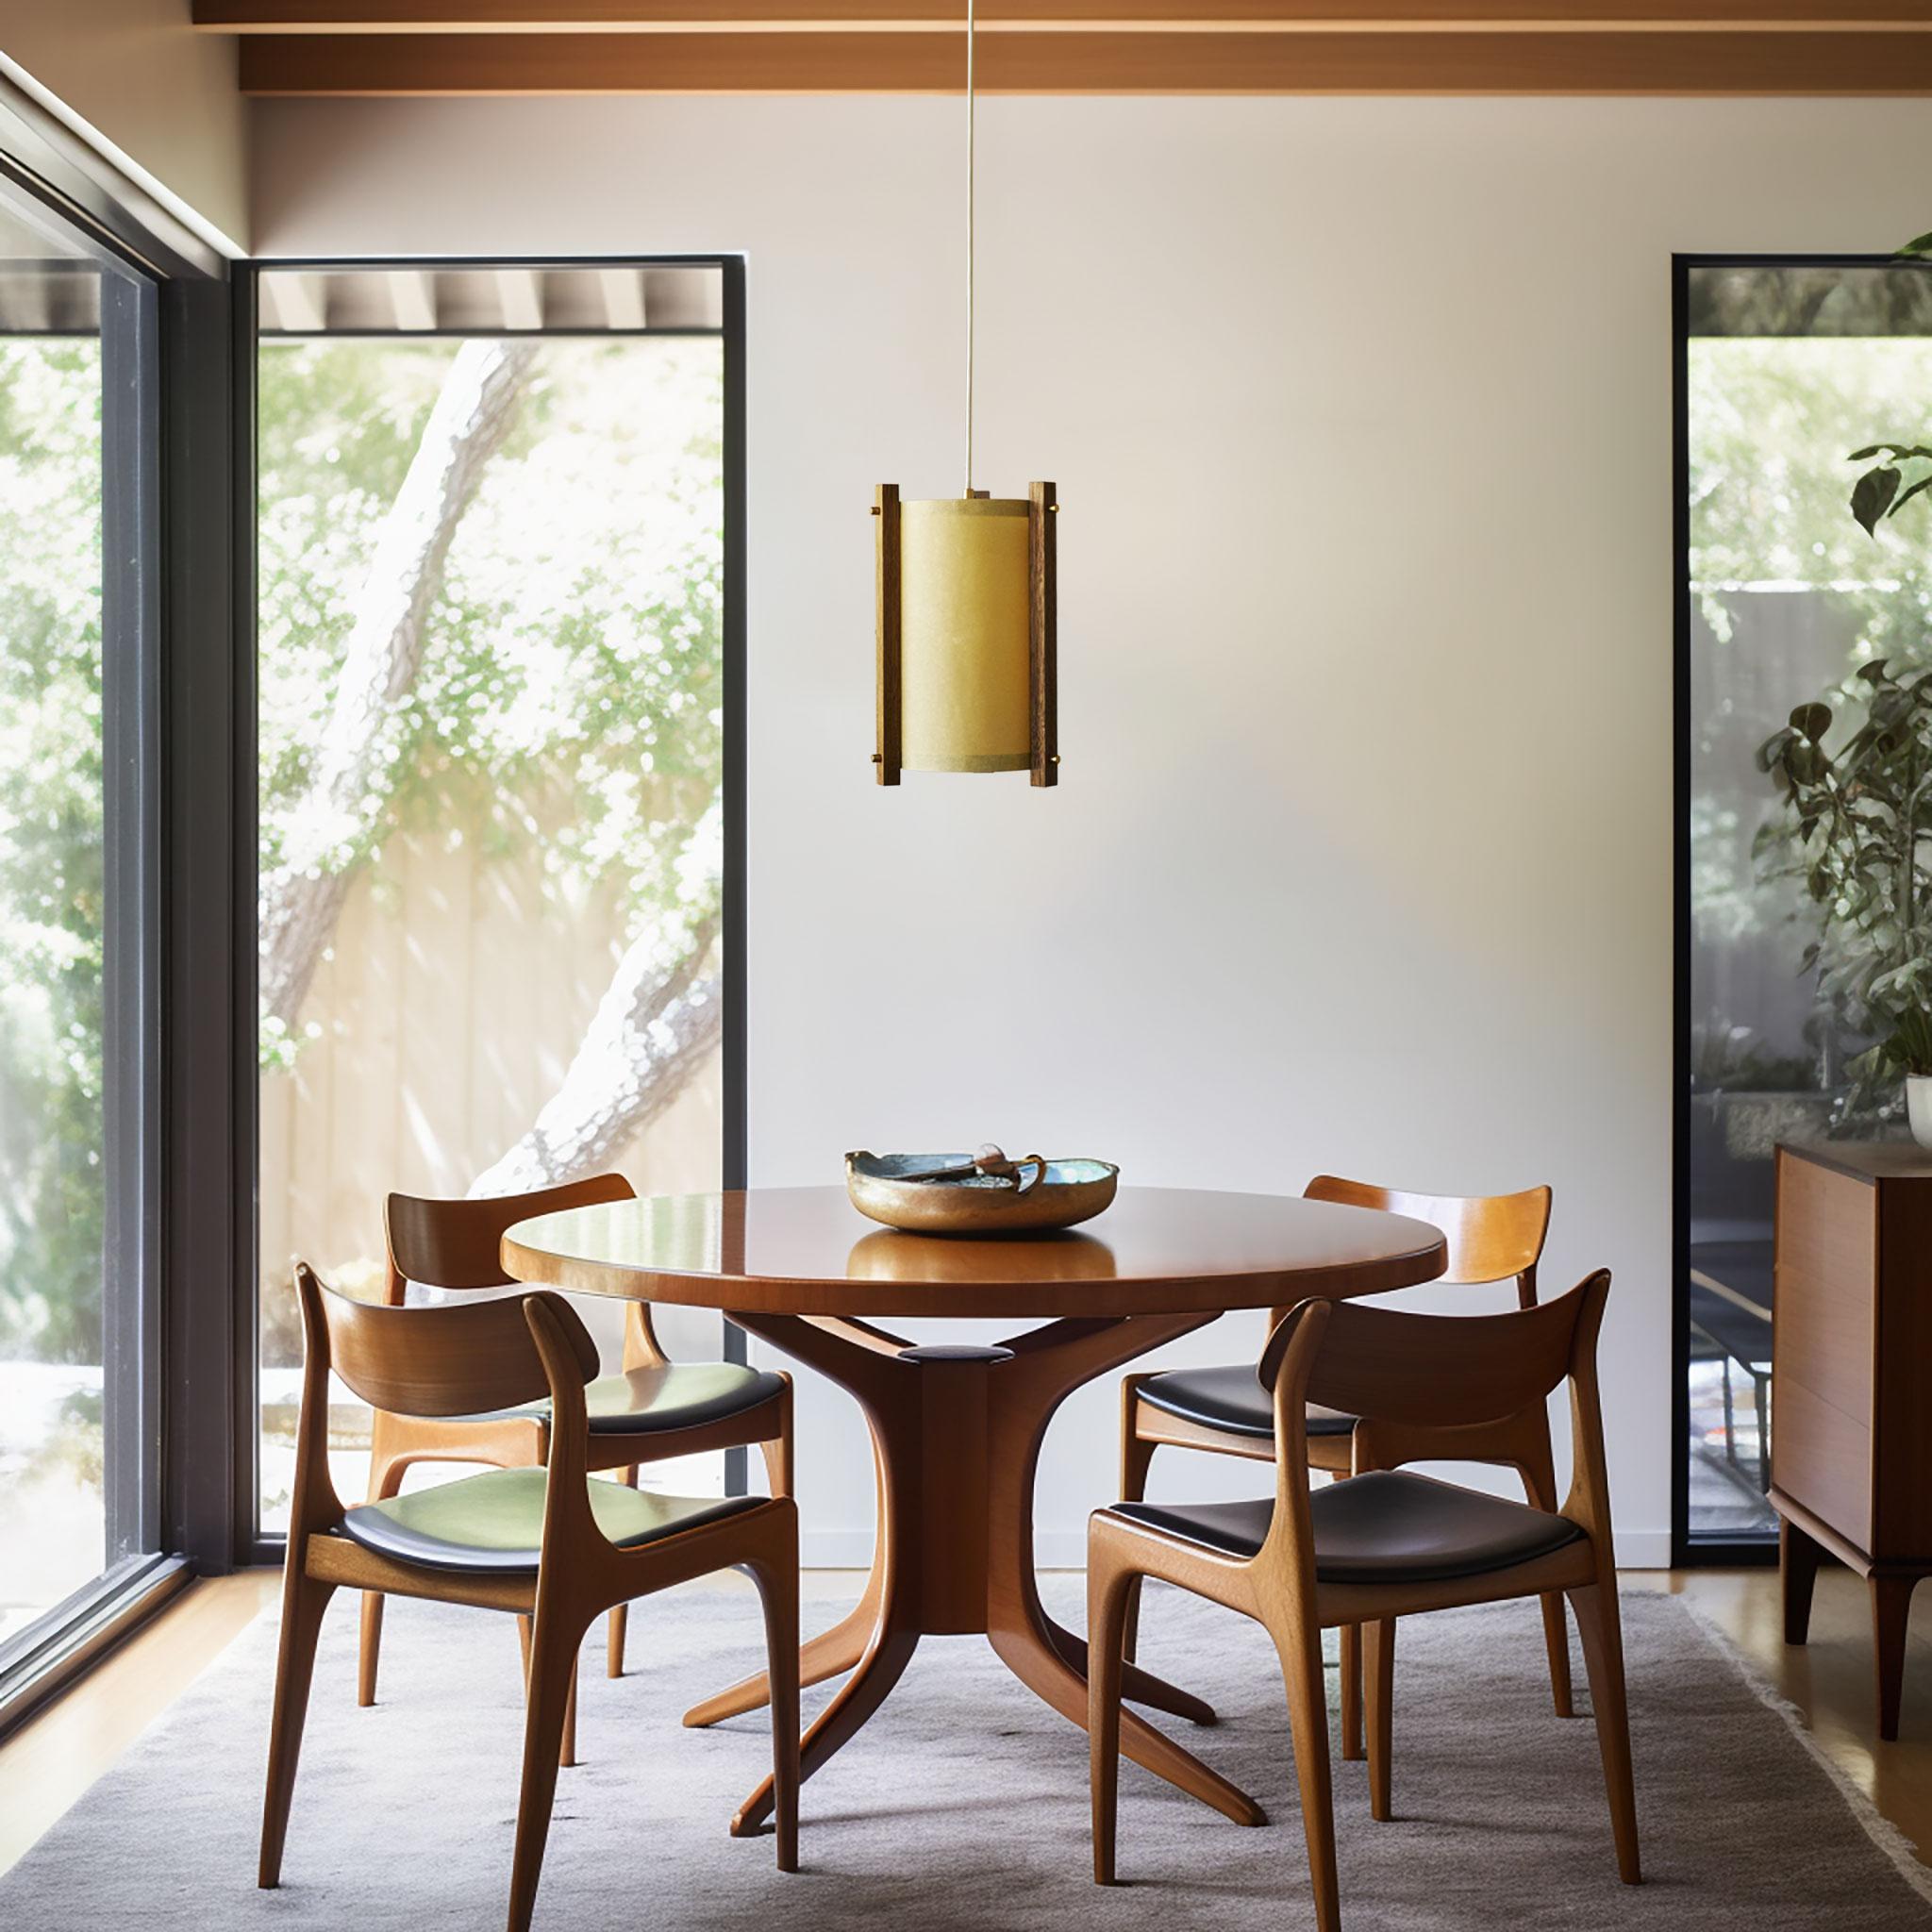 This simple, small modern design adds an element of sculpture to your room while the brass accents and paper shade brings a soft glow to any space. These pendants are equally beautiful off during the day as well as illuminated in the evening.

The